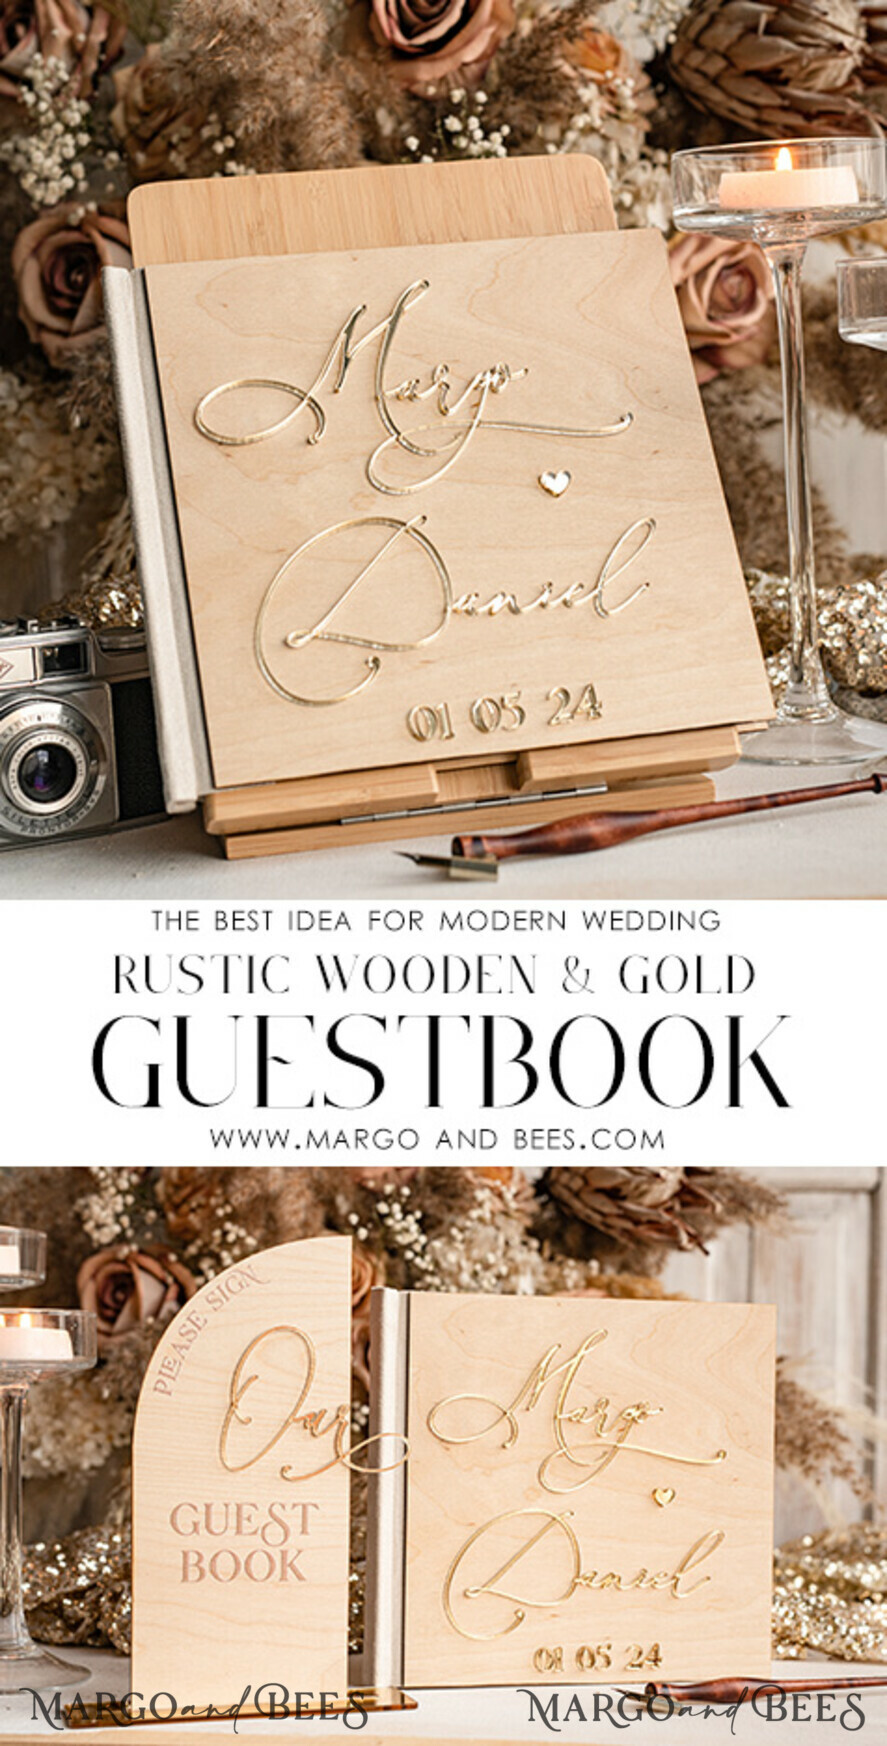 Rustic Birch Wooden Card Box with Lock - Personalize with Your Unique Touch  - Secure Your Precious Wedding Cards in Style - Perfect for Wedding Holder